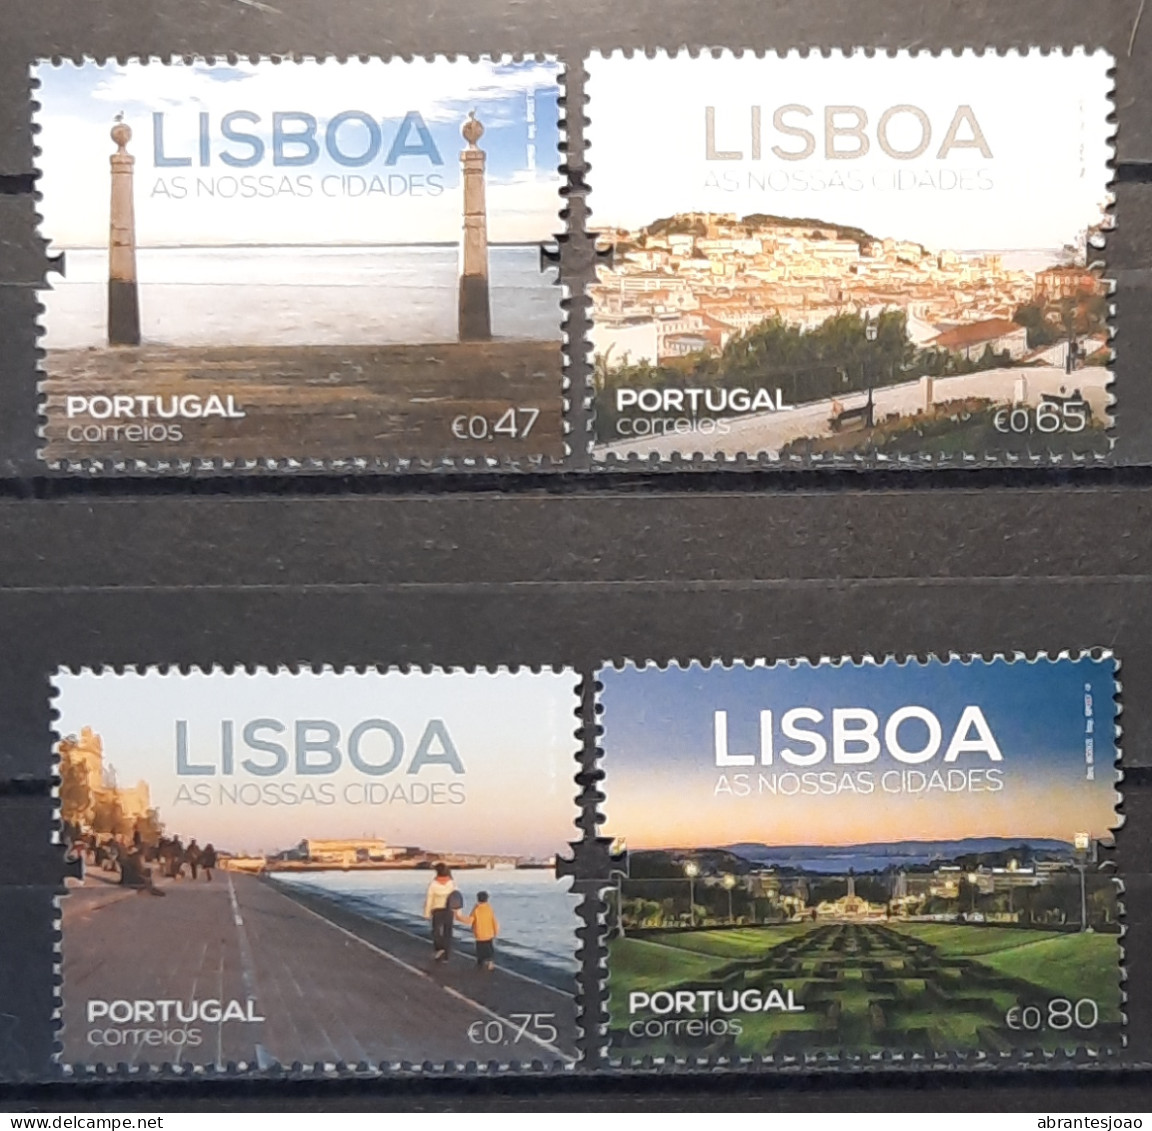 2016 - Portugal - MNH - Our Cities - Group 1 - Views Of Lisbon - 4 Stamps - Ongebruikt